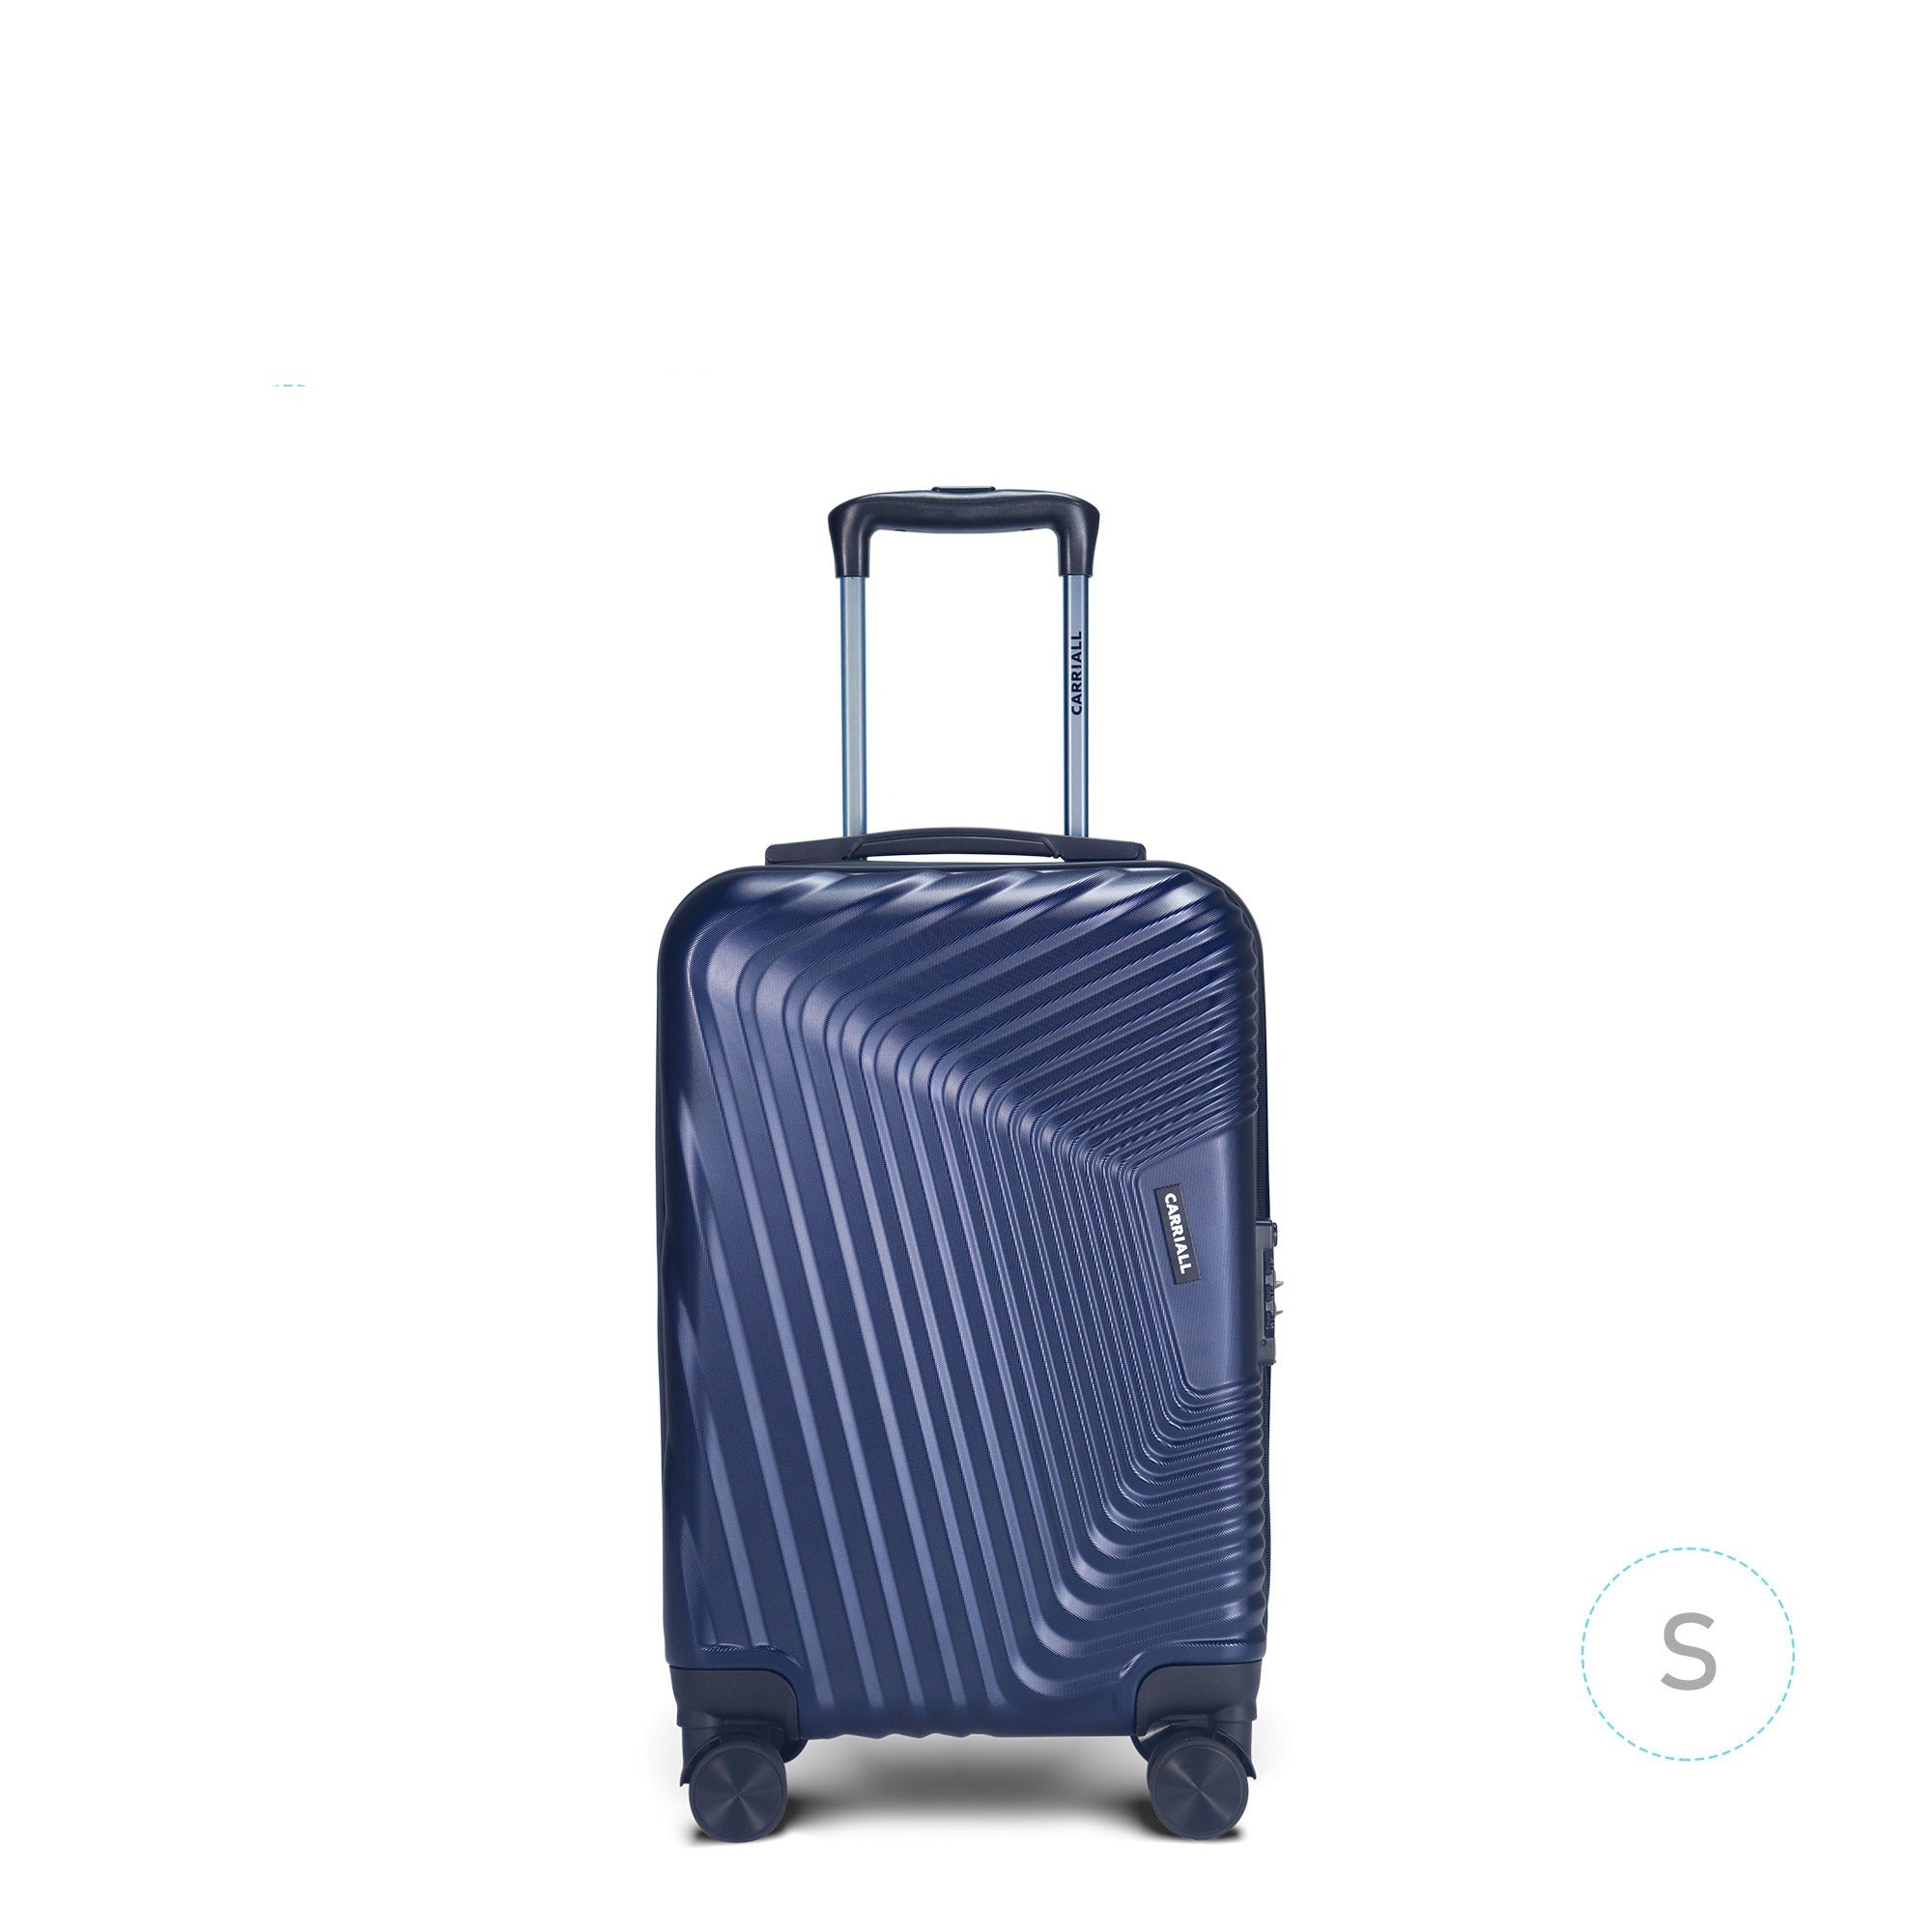 Trail Smart Luggage, Built-in weighing scale